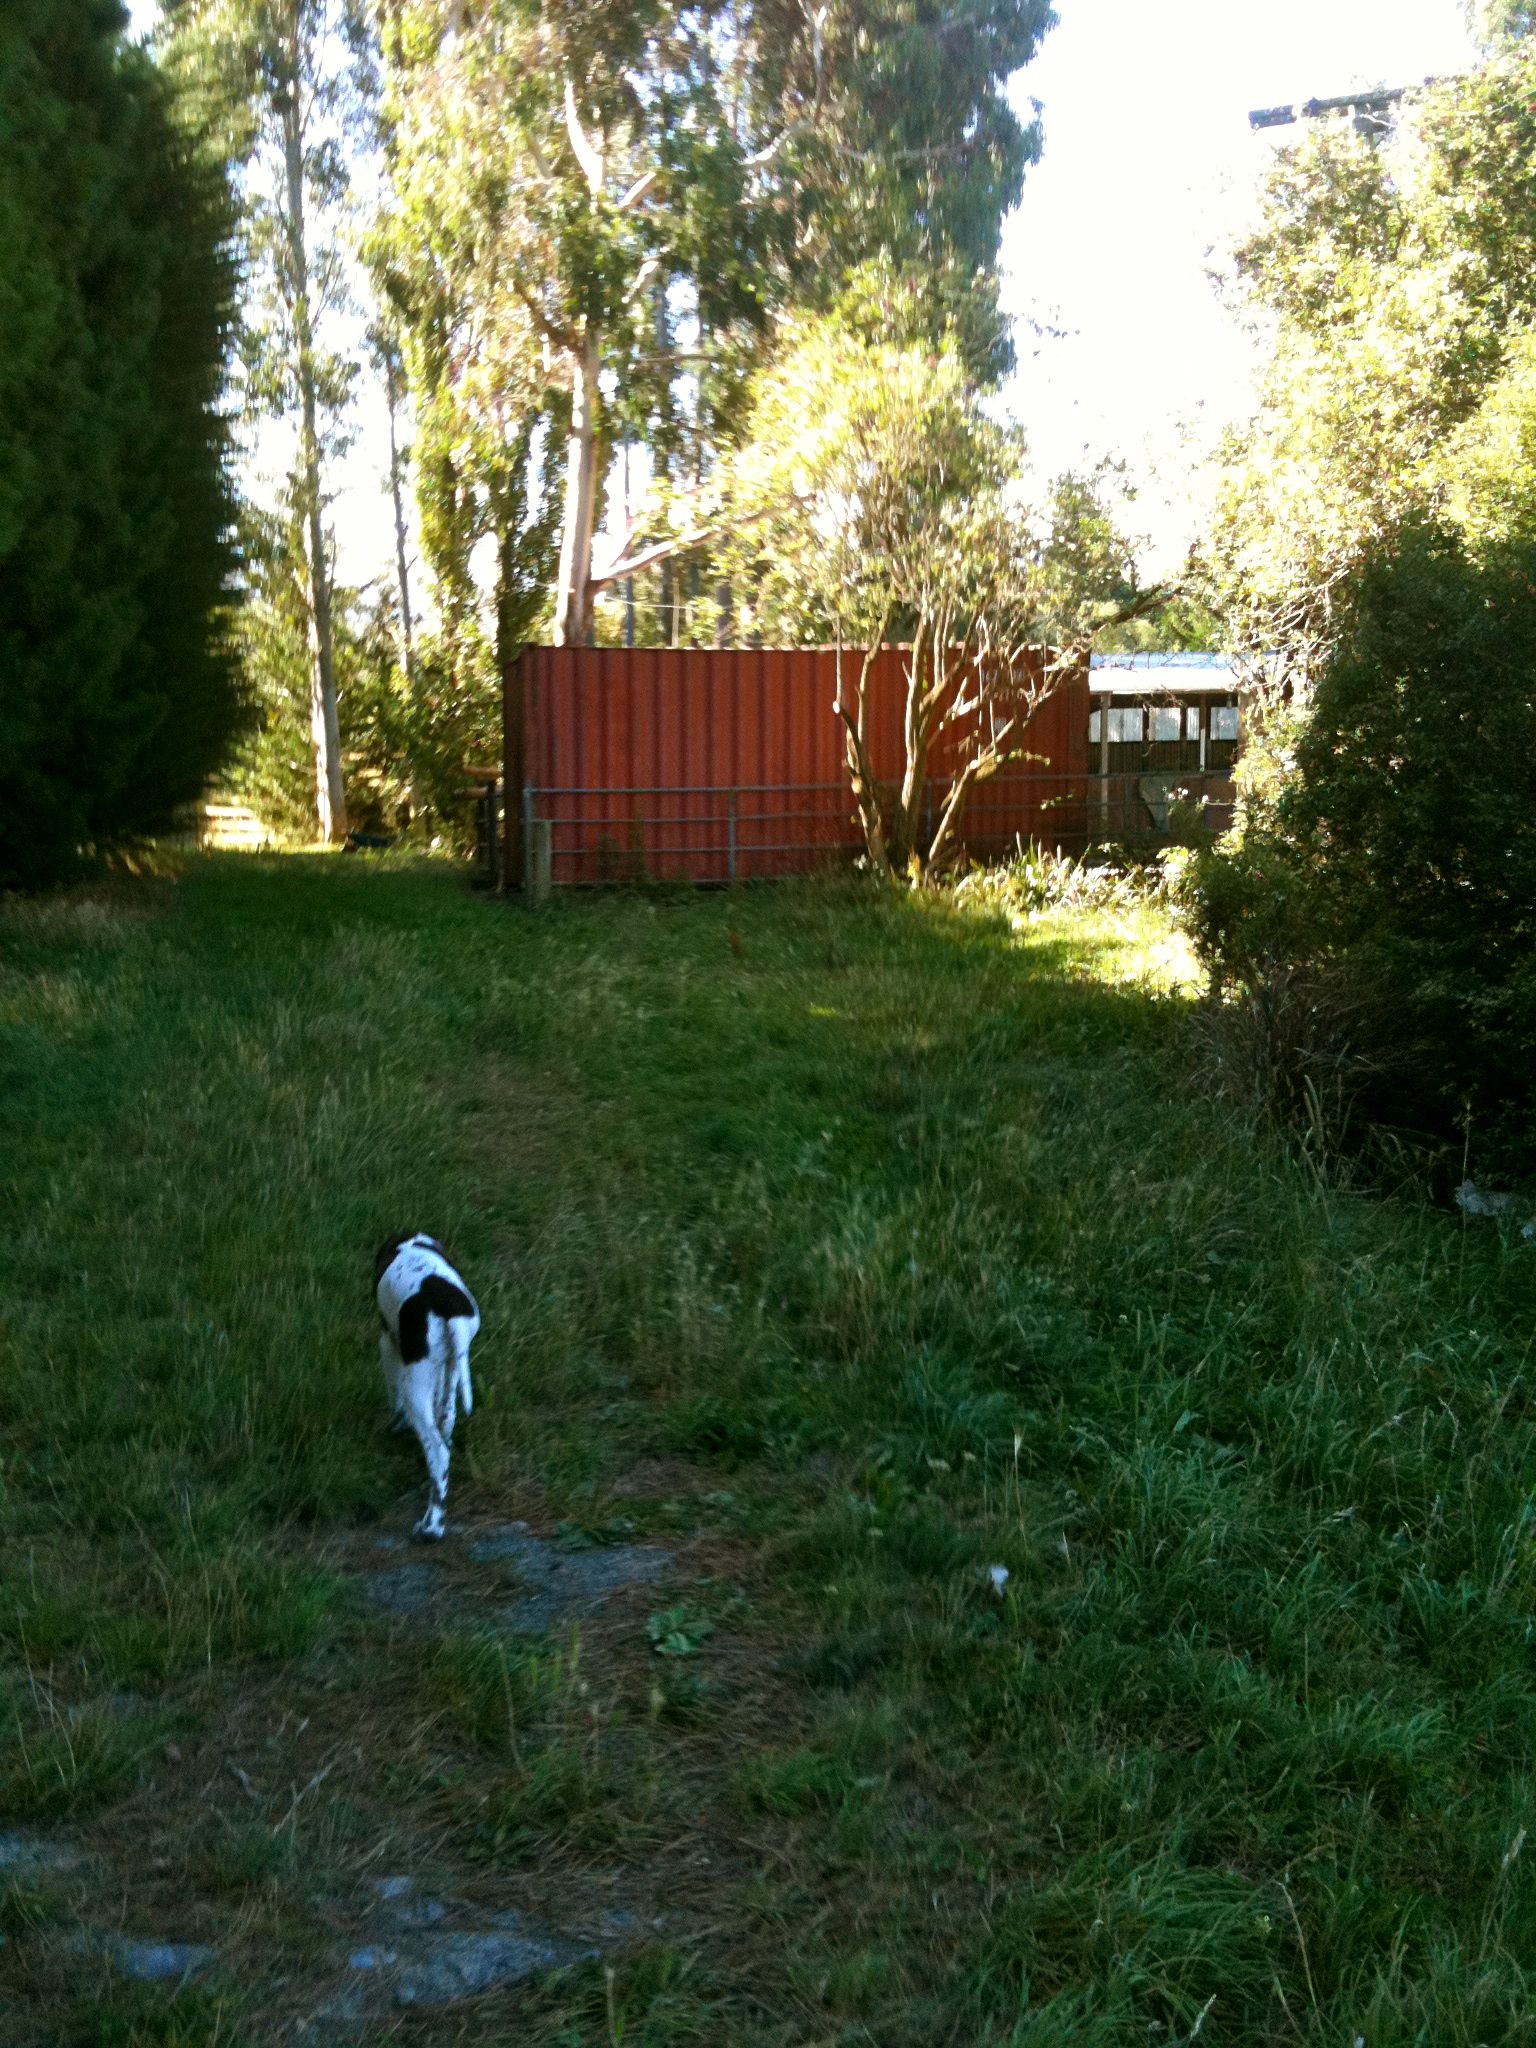 Zeph wonders if our container would make a good dog kennel.